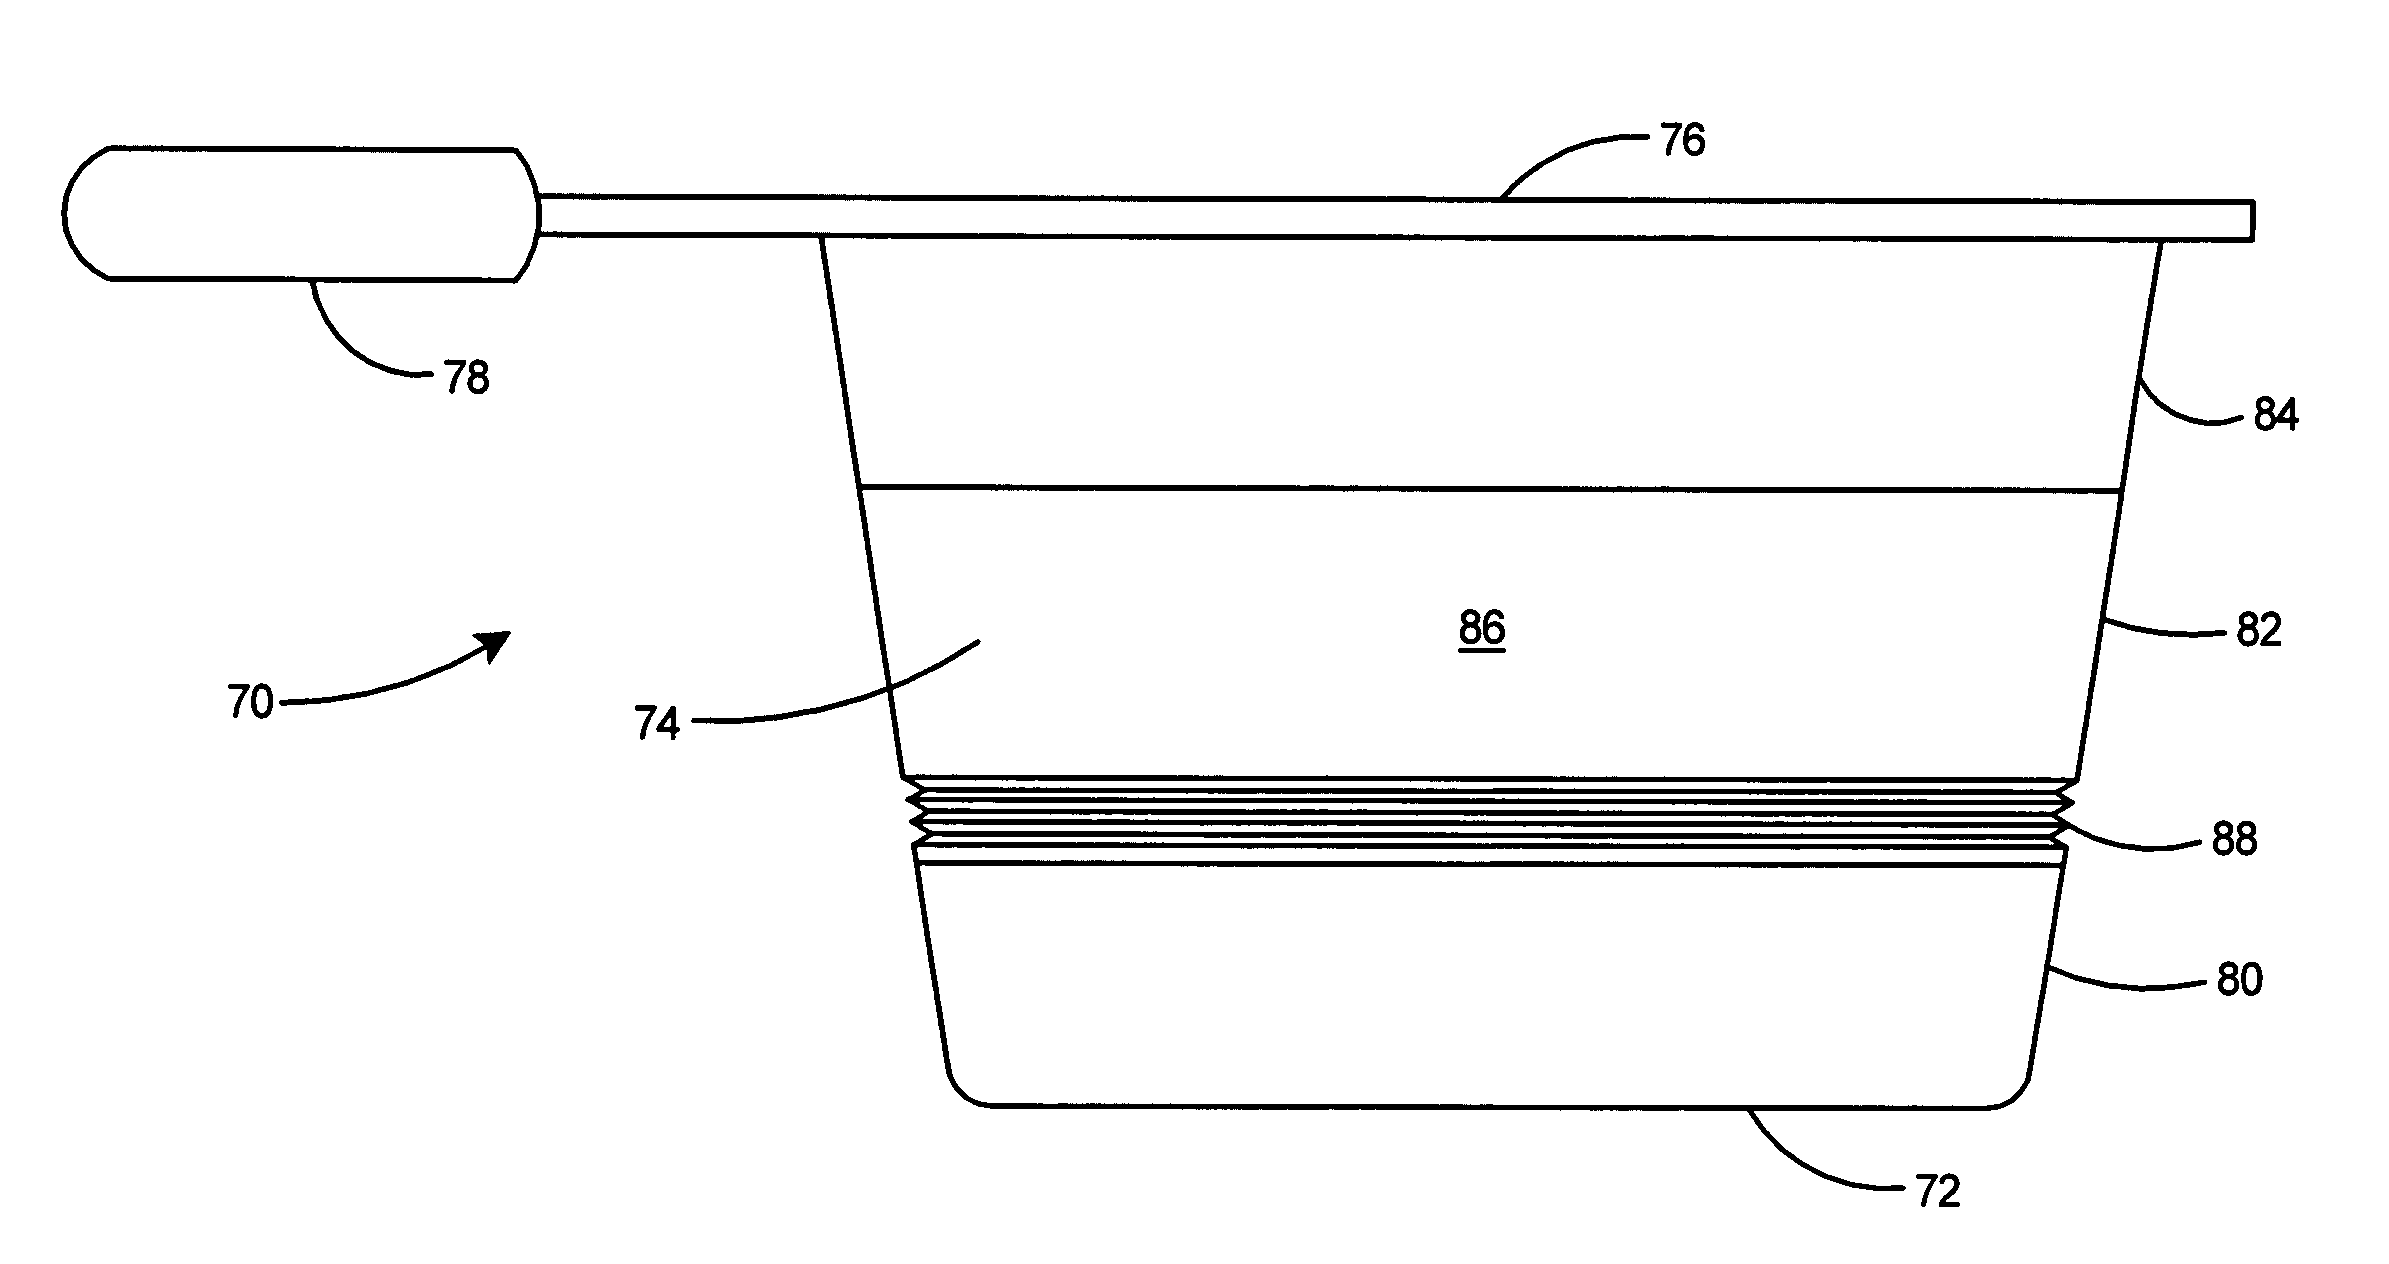 Foldable stovetop cookware and method of production